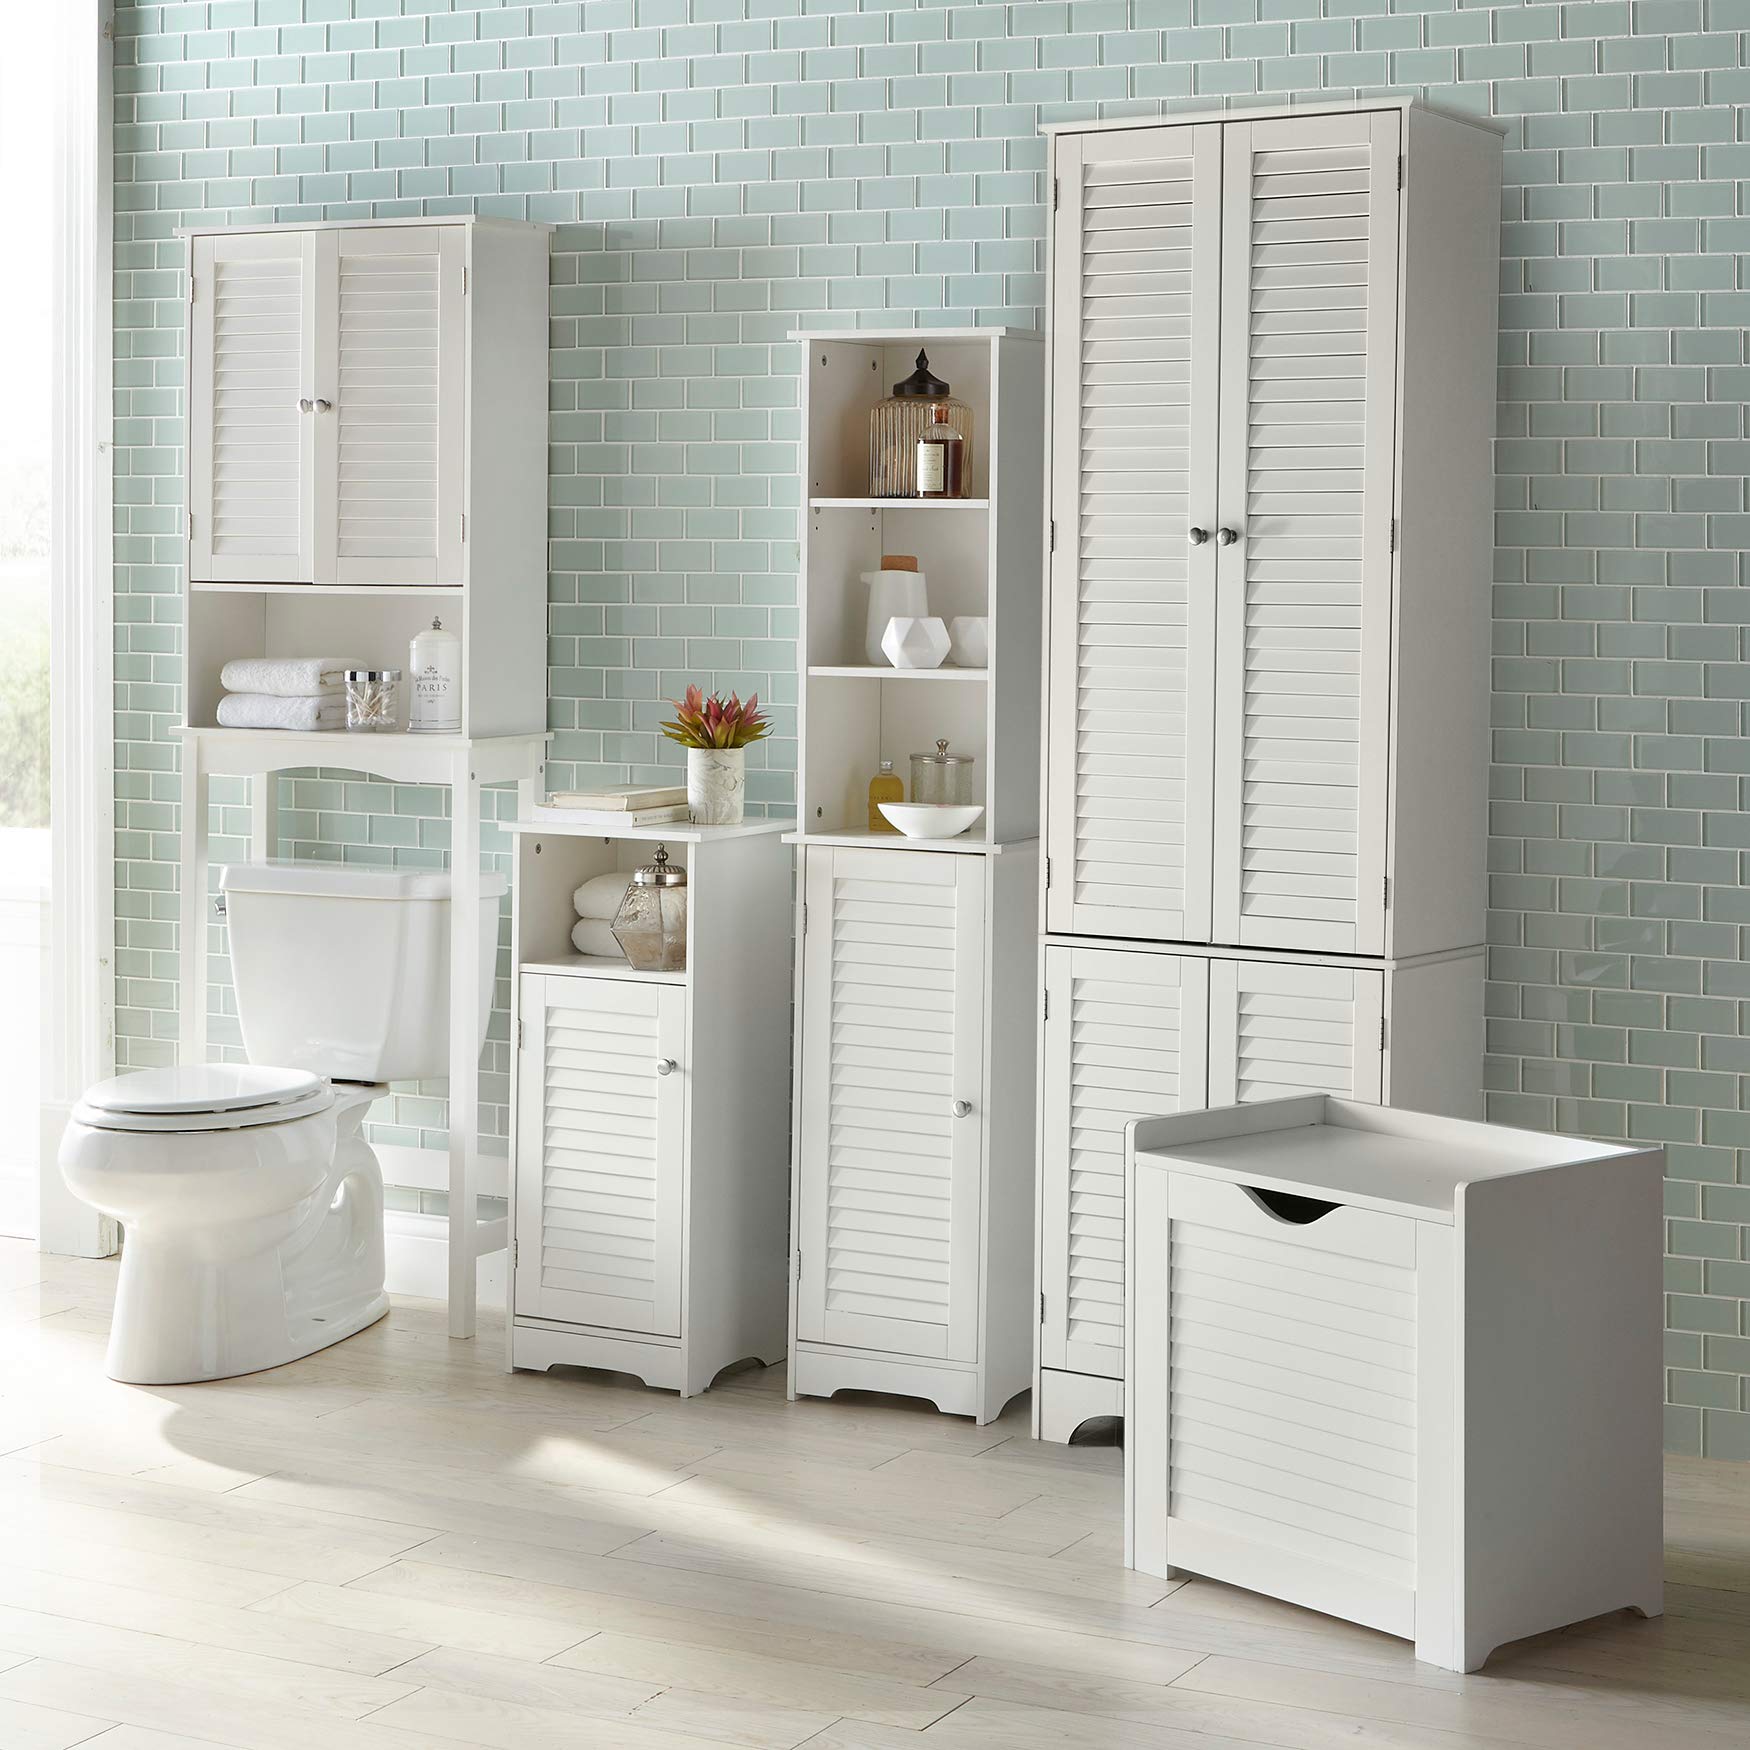 BrylaneHome Louvre Short Cabinet with Cubby - White